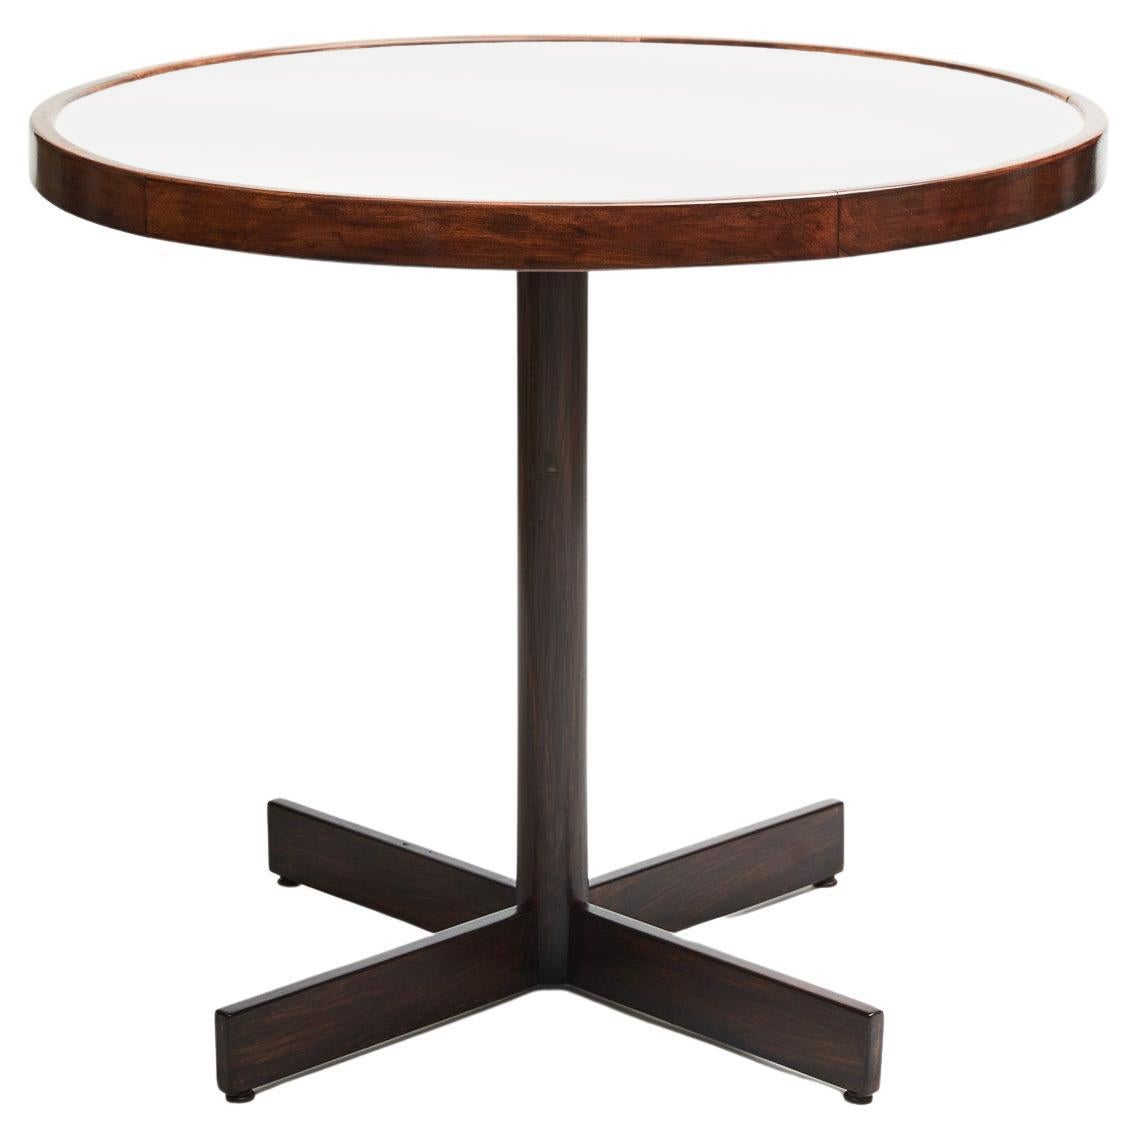 Available today, this Midcentury Modern Cocktail/Breakfast Table in Hardwood & White top by Jorge Zalszupin for L’Atelier is gorgeous!

The table has an iron base, caviuna hardwood finishes and top in white Formica. The table has been refinished